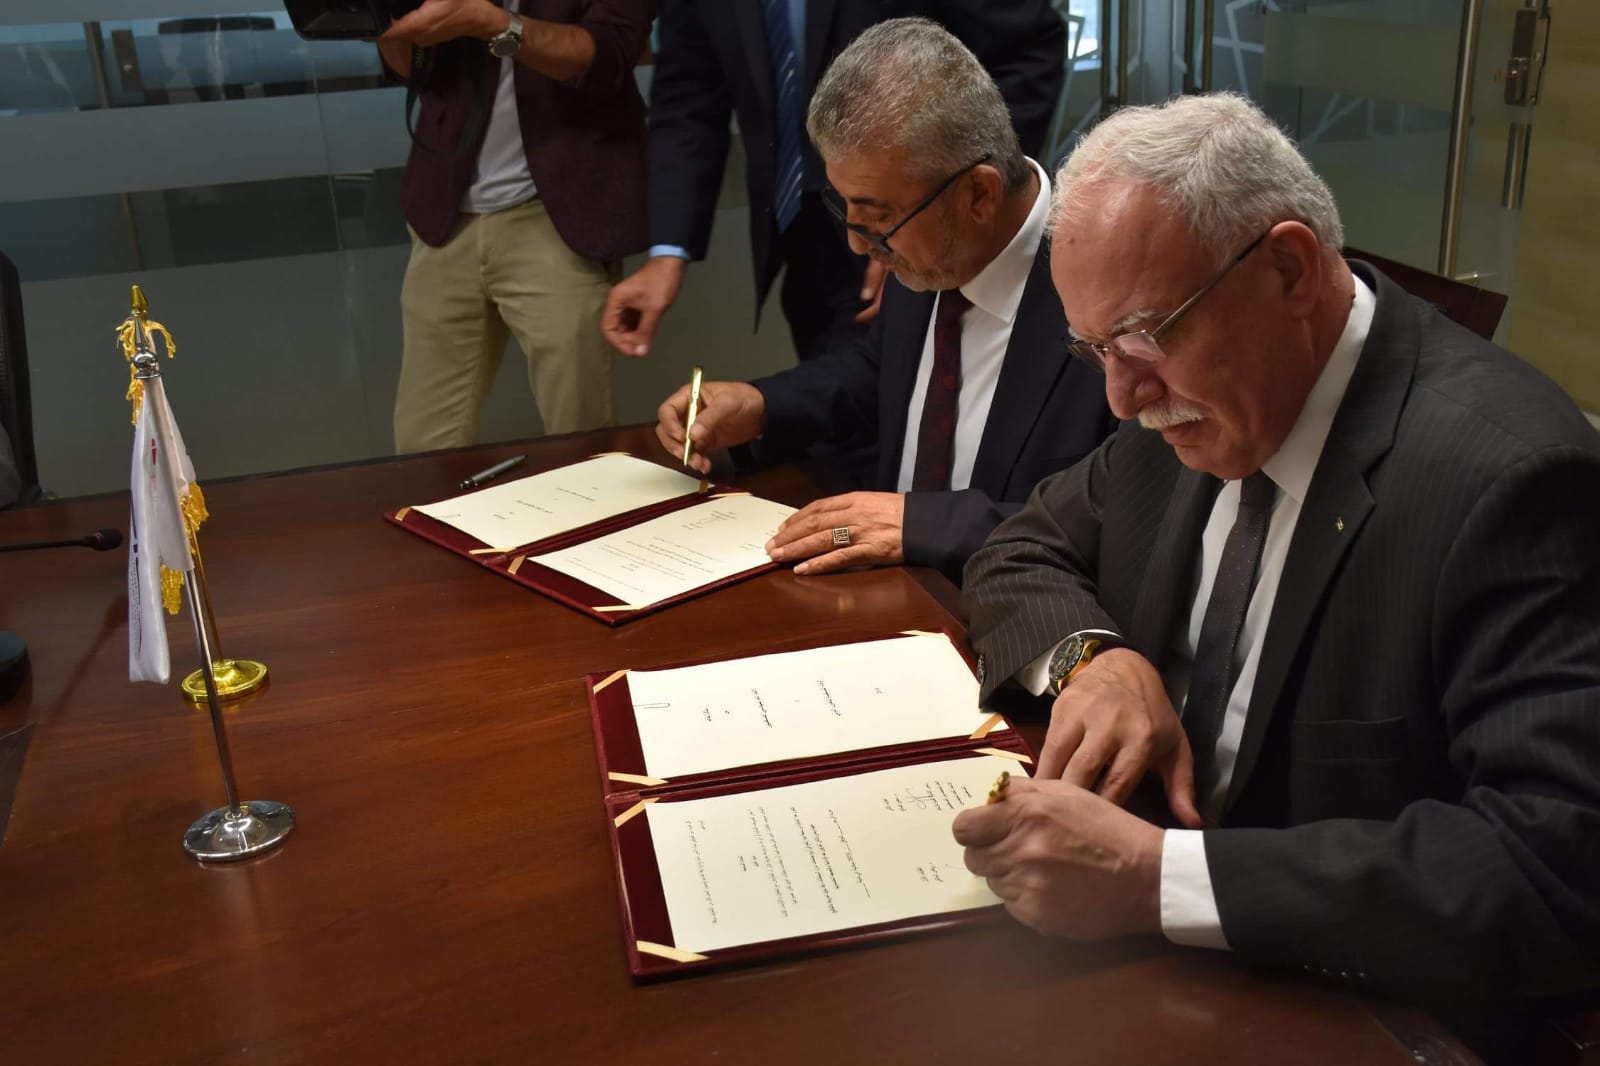 A strategic cooperation agreement between the Palestinian International Cooperation Agency and the General Union of Palestinian Engineers to engage Palestinian expertise from the diaspora in development programs